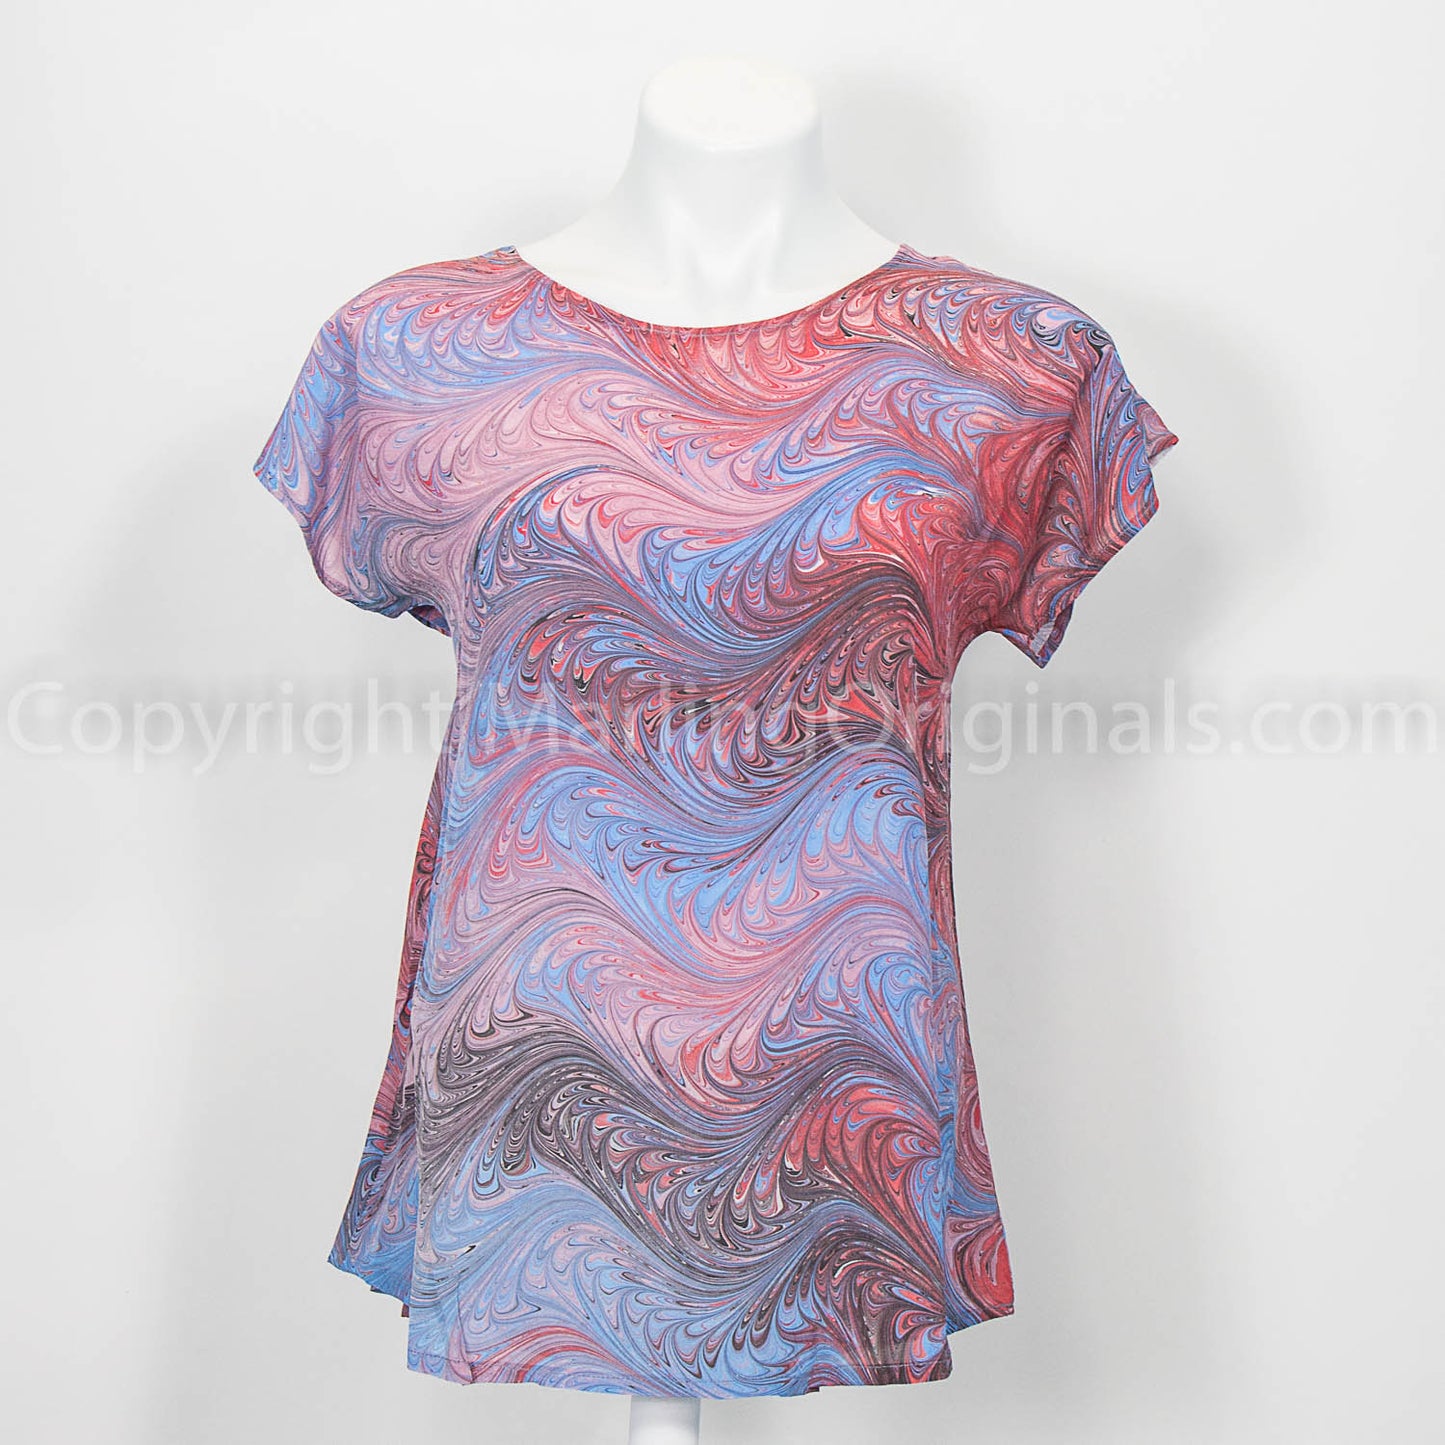 short sleeve silk top marbled with a feathered pattern in shades of mauve and sky blue